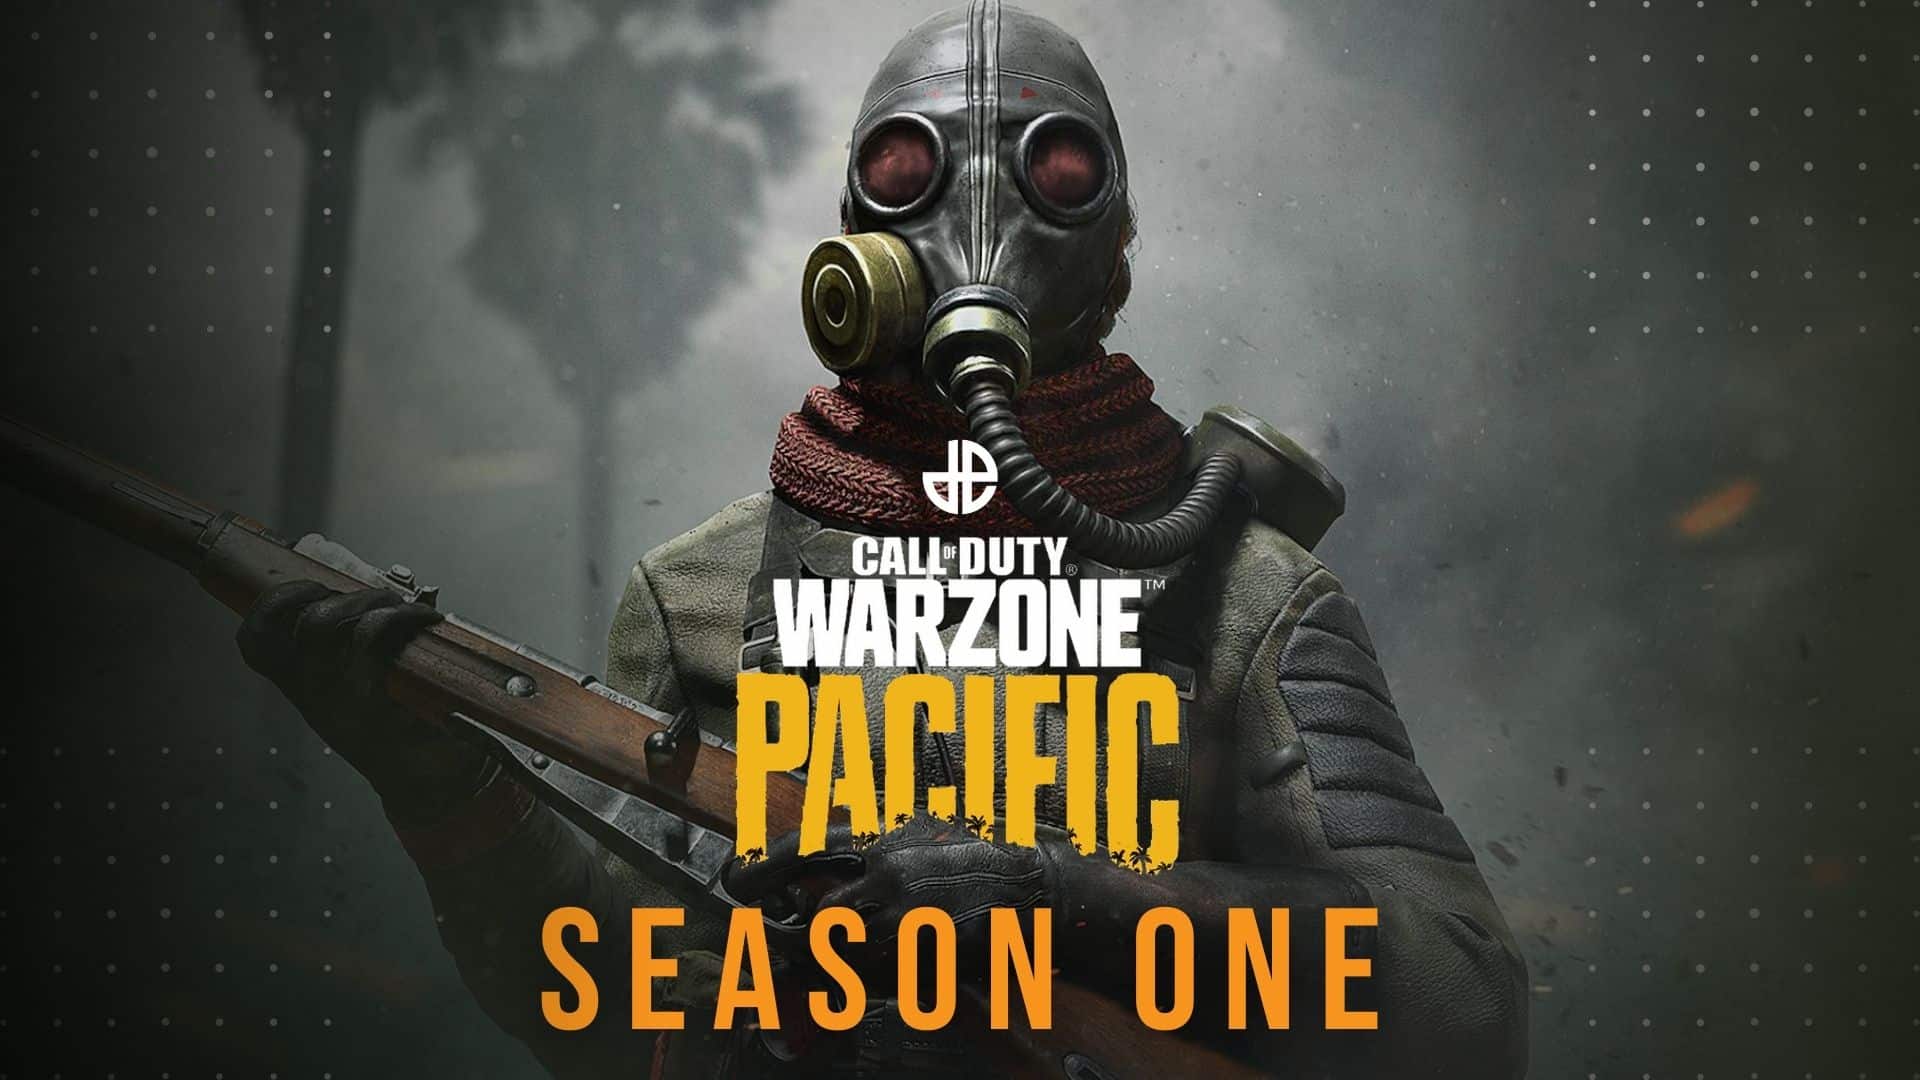 Call of Duty Warzone Pacific Season 1 patch notes.